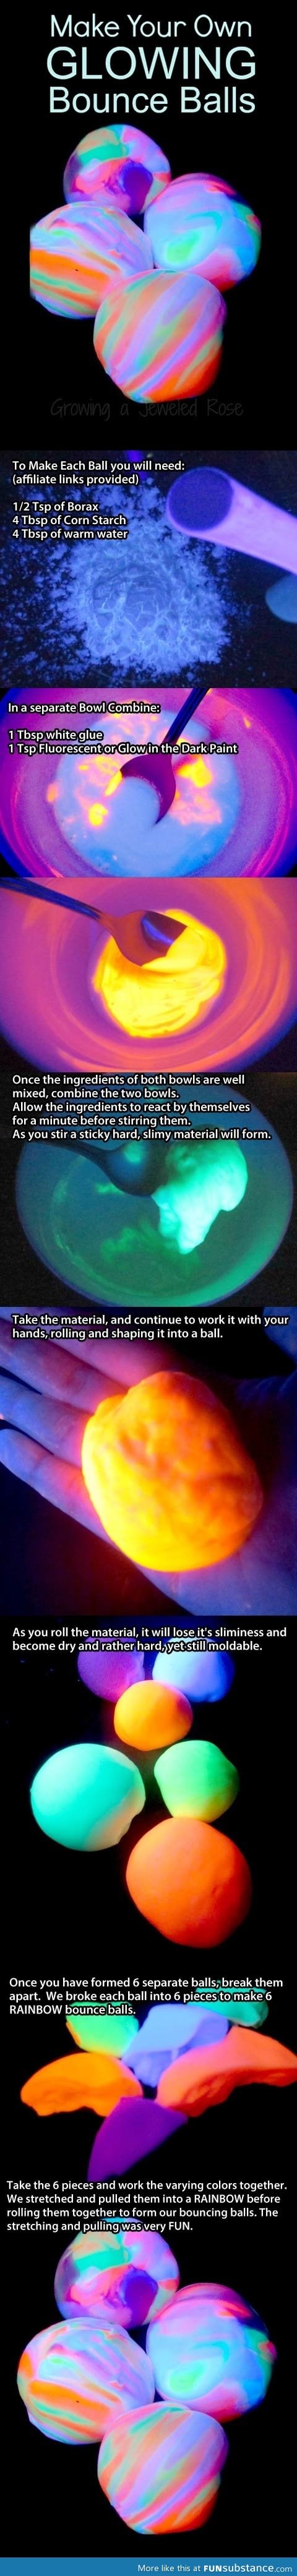 Make your own glowing bounce balls